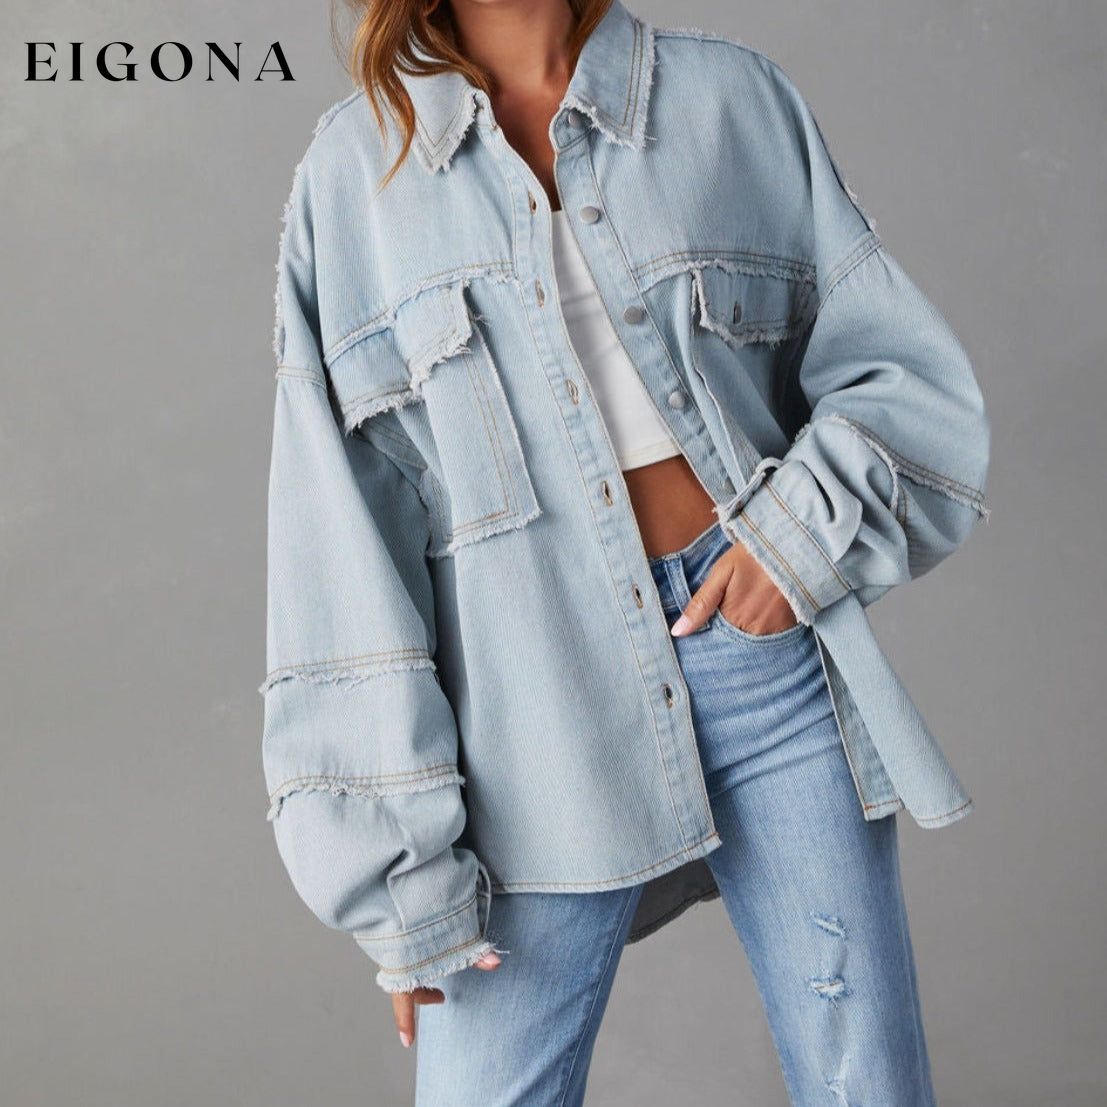 Dropped Shoulder Raw Hem Jacket Misty Blue clothes Denim Jacket Jacket long sleeve top Outerwear Ship From Overseas Shipping Delay 09/29/2023 - 10/02/2023 X@Y@K